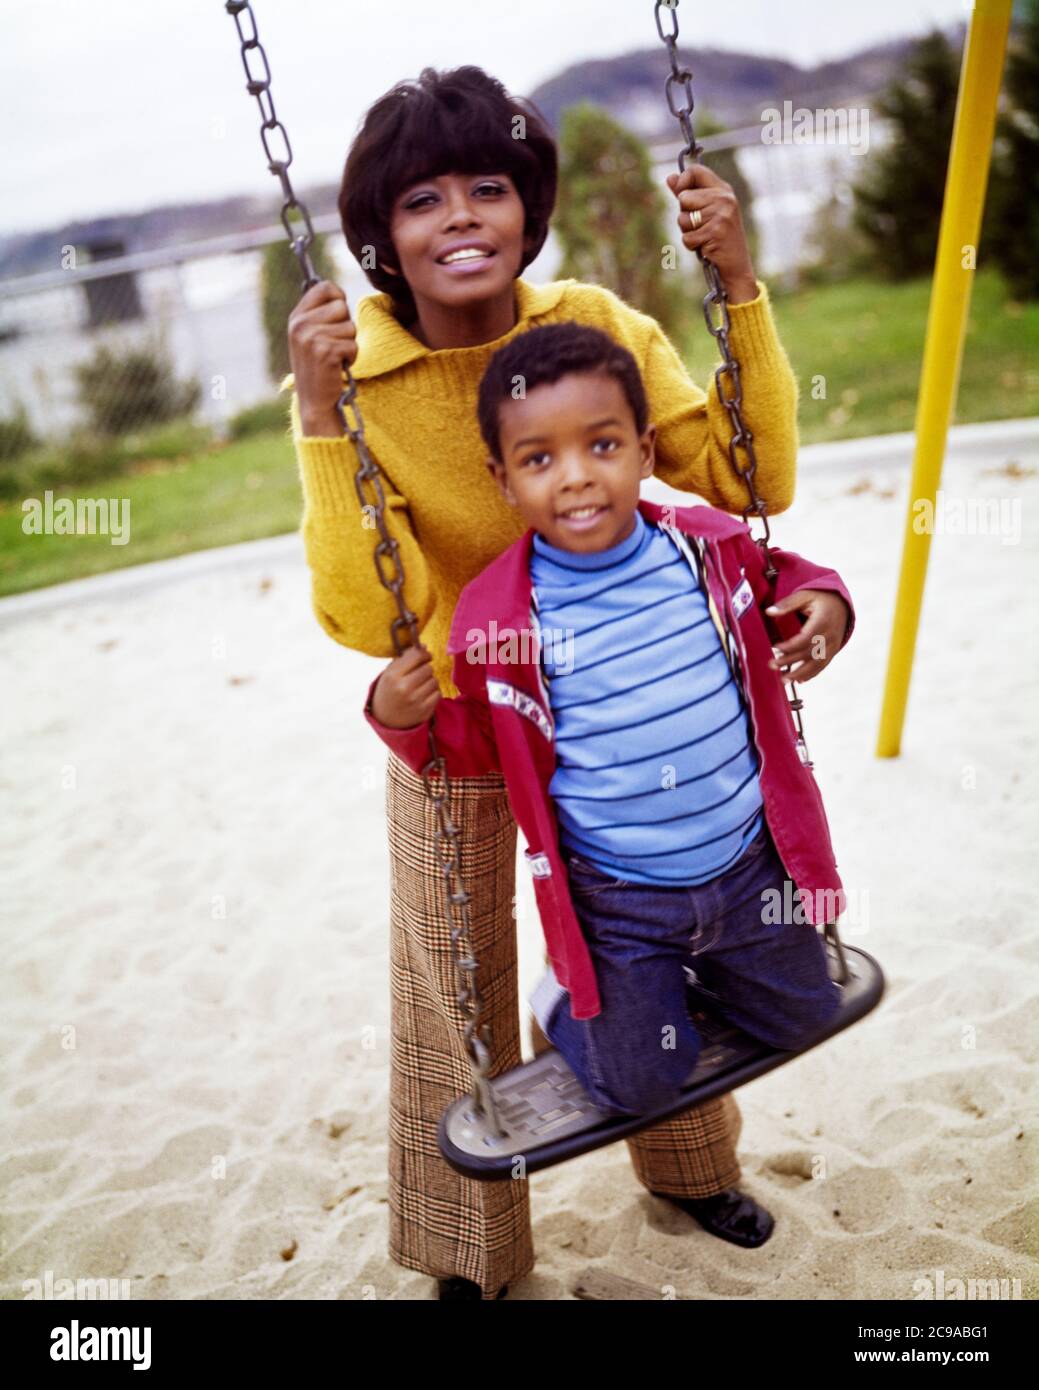 1970s AFRICAN-AMERICAN WOMAN MOTHER STANDING BEHIND HER SON BOY KNEELING ON PLAYGROUND SWING LOOKING AT CAMERA BOTH SMILING - kj5363 PHT001 HARS PAIR SUBURBAN COLOR HER MOTHERS OLD TIME NOSTALGIA OLD FASHION 1 FITNESS JUVENILE STYLE HEALTHY YOUNG ADULT SAFETY STRONG SONS PLEASED JOY LIFESTYLE FEMALES HOME LIFE COPY SPACE HALF-LENGTH LADIES PERSONS CARING MALES EYE CONTACT KNEELING ACTIVITY PHYSICAL CHEERFUL BOTH PROTECTION STRENGTH AFRICAN-AMERICANS AFRICAN-AMERICAN RECREATION BLACK ETHNICITY ON SMILES CONNECTION FLEXIBILITY JOYFUL MUSCLES PERSONAL ATTACHMENT AFFECTION EMOTION JUVENILES MOMS Stock Photo